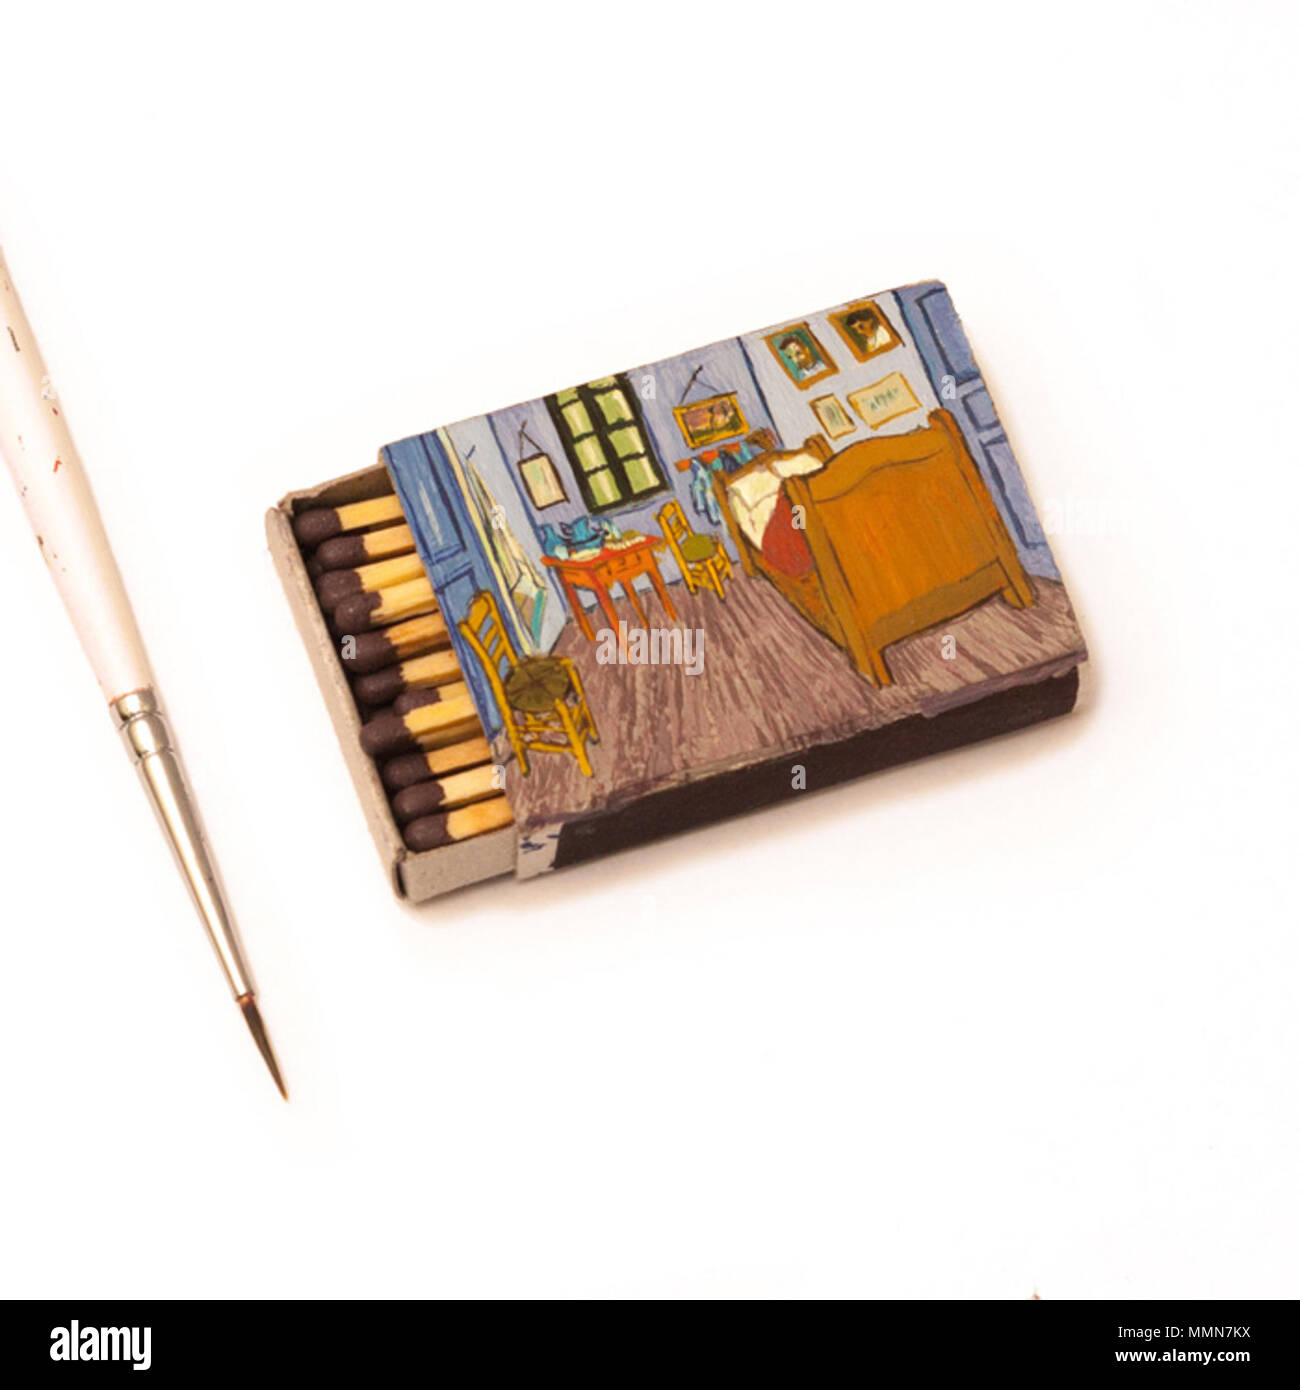 Painting Of Bedroom In Arles By Van Gogh On A Matchbox By